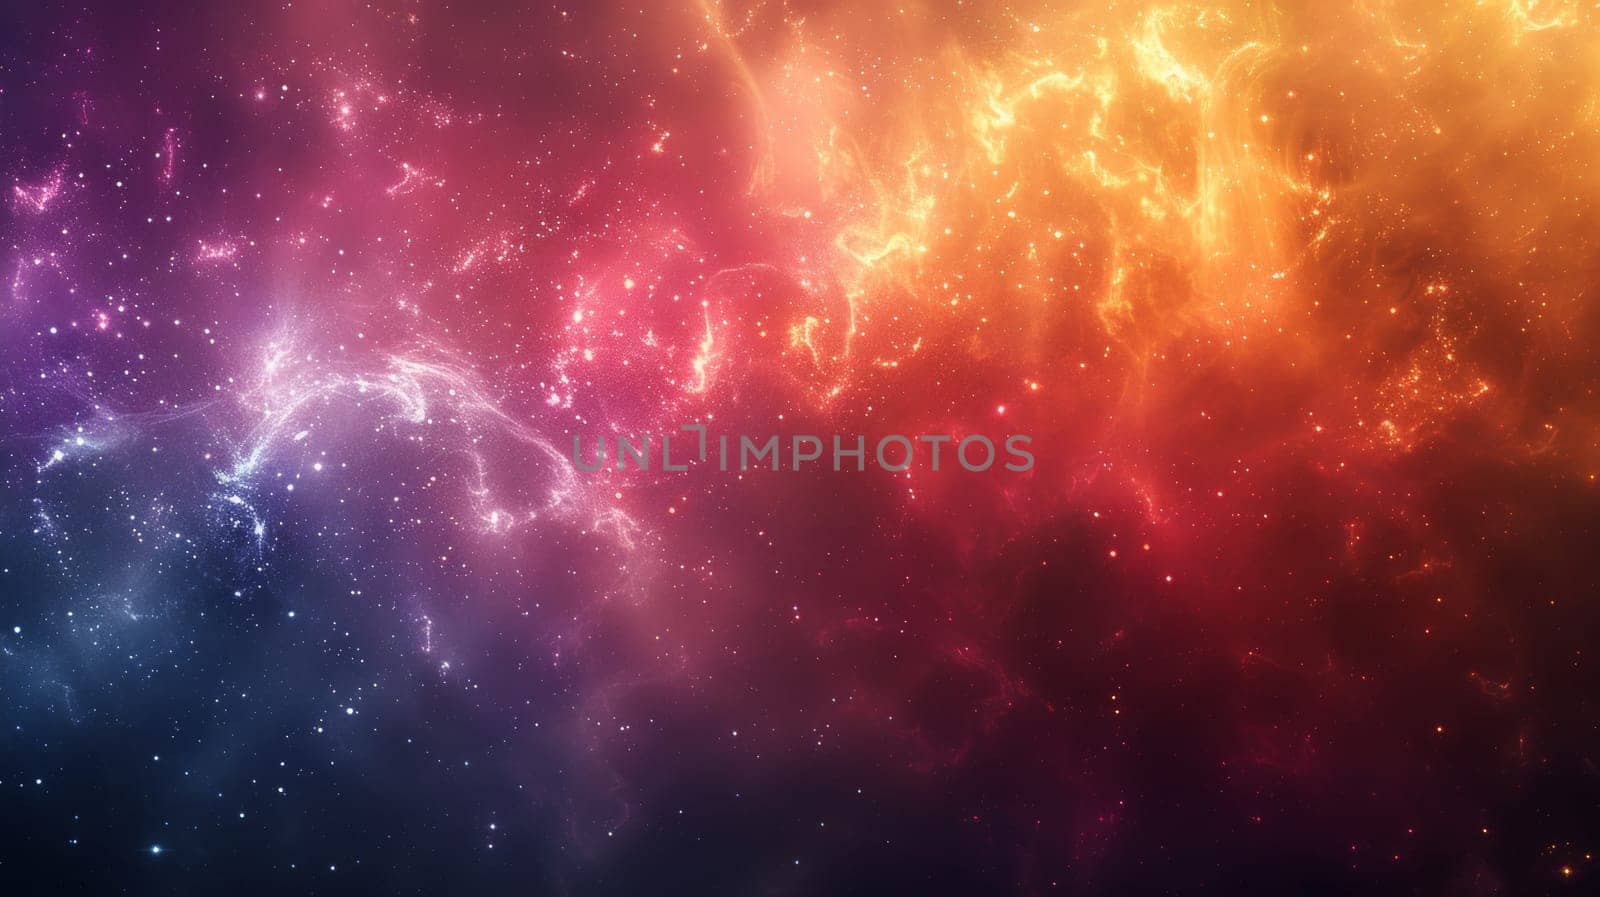 A colorful galaxy with stars and a nebula in the background